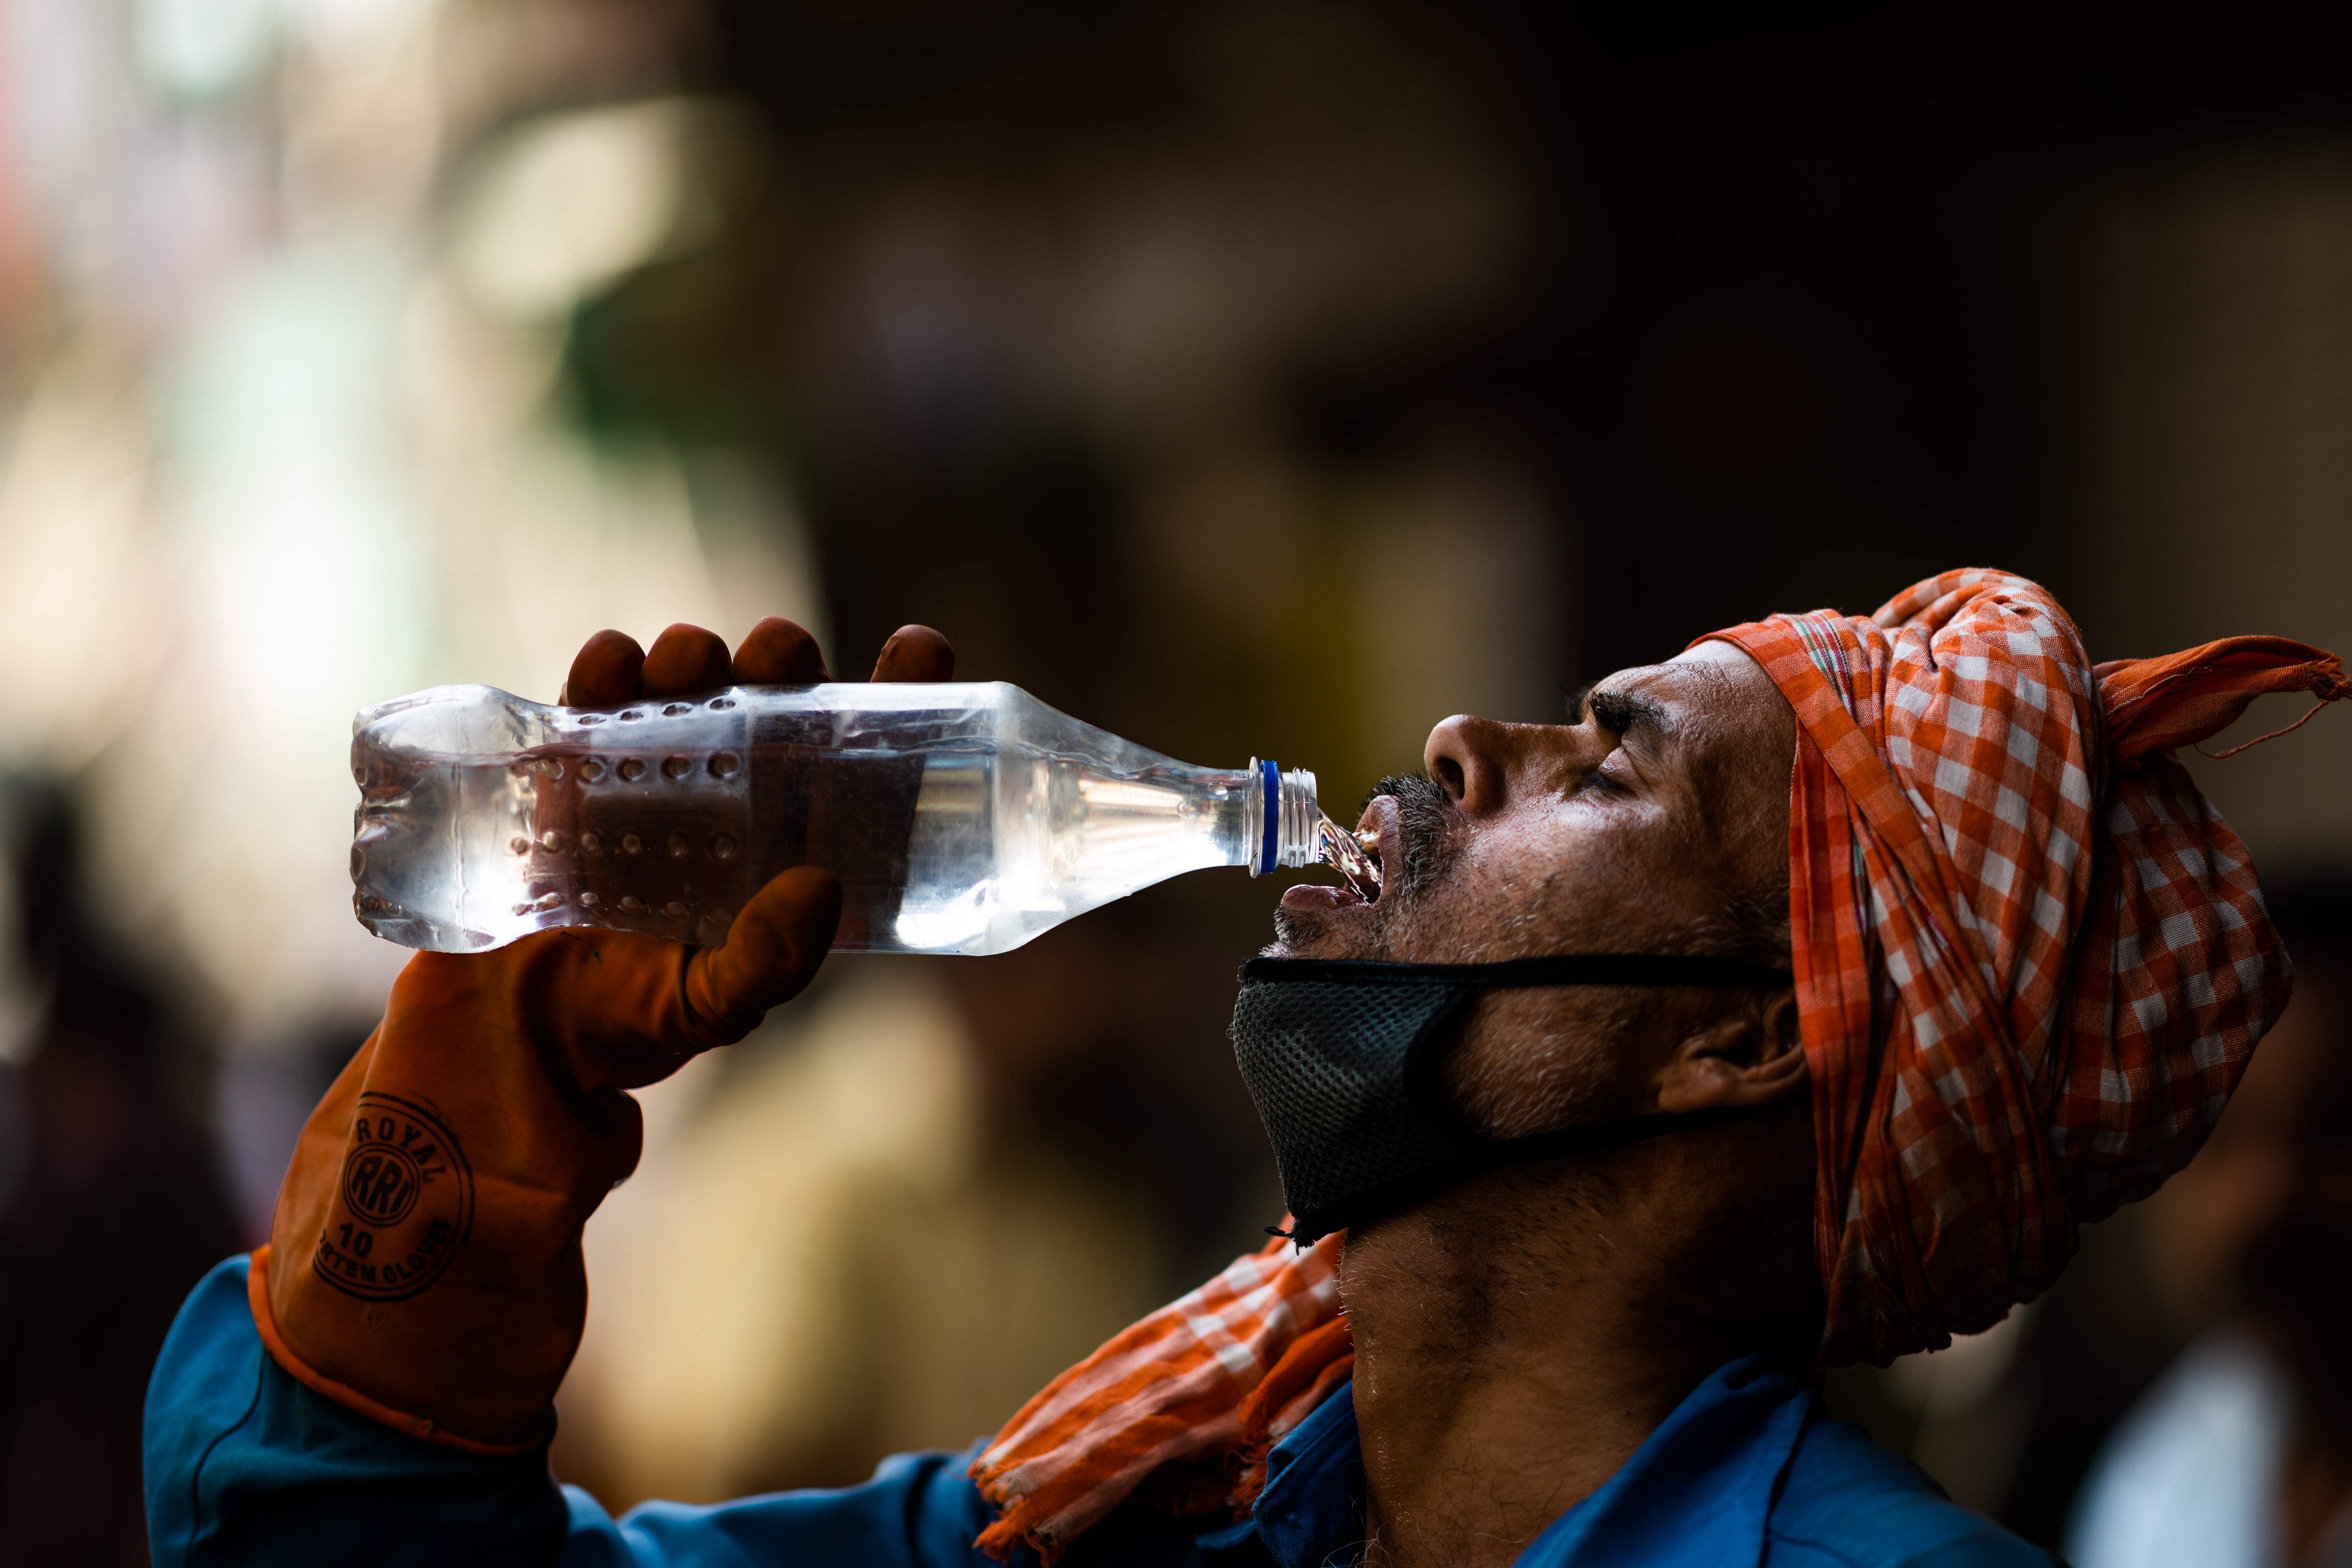 A labourer quenches his thirst with water from a bottle on a street amid rising temperatures in New Delhi. (AFP photo)